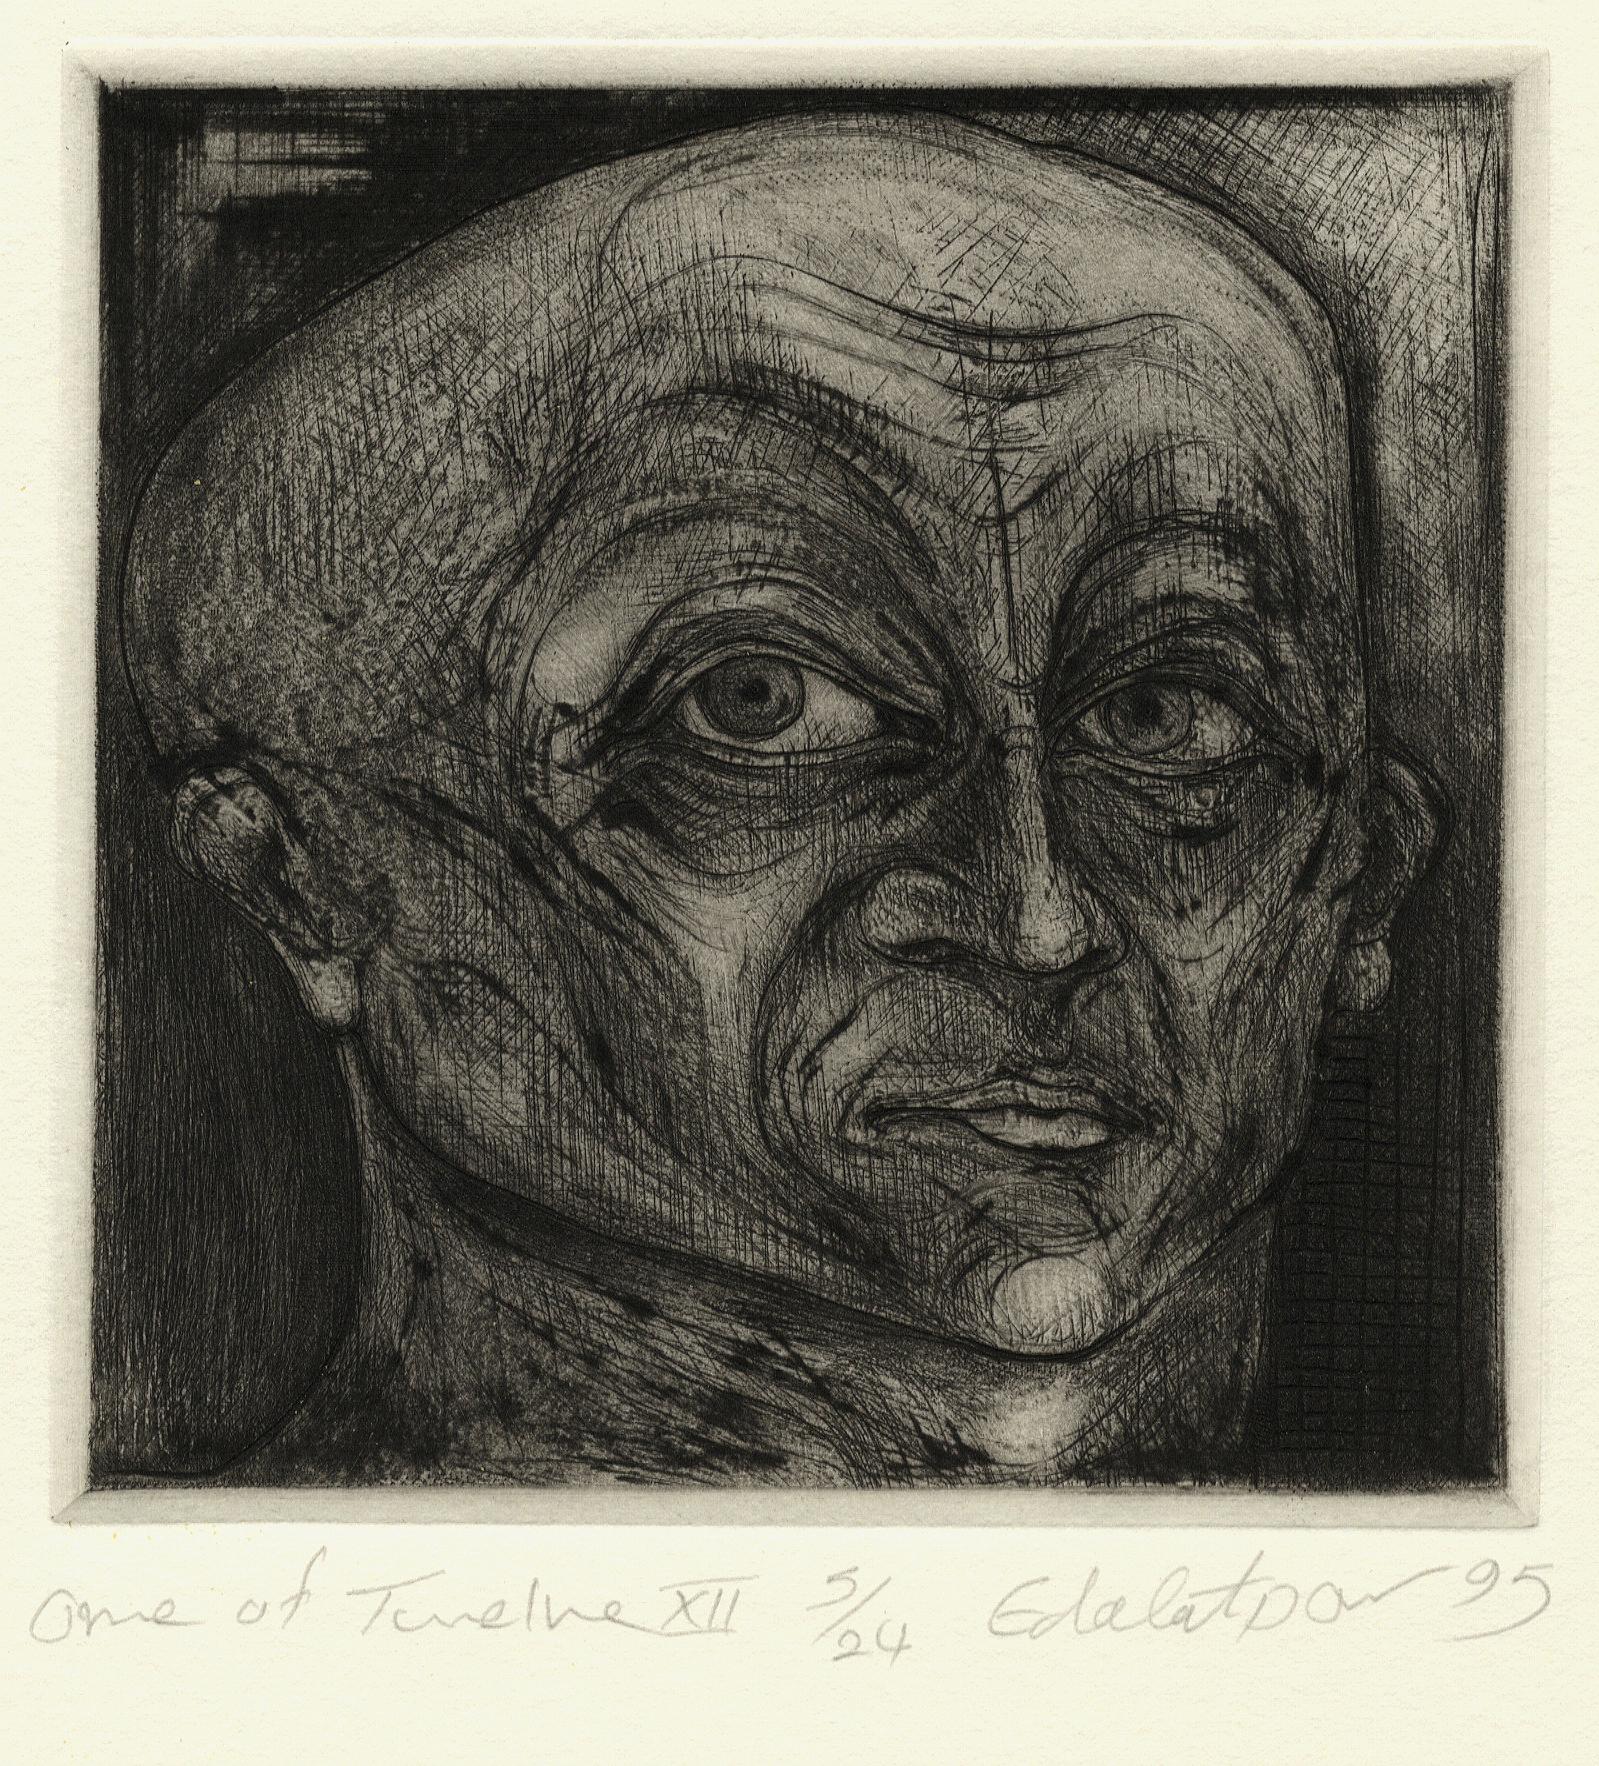 One of Twelve XII (etchings of one of 12 heads based on  monumental sculpture) - Post-Modern Print by Seyed M. S. Edalatpour